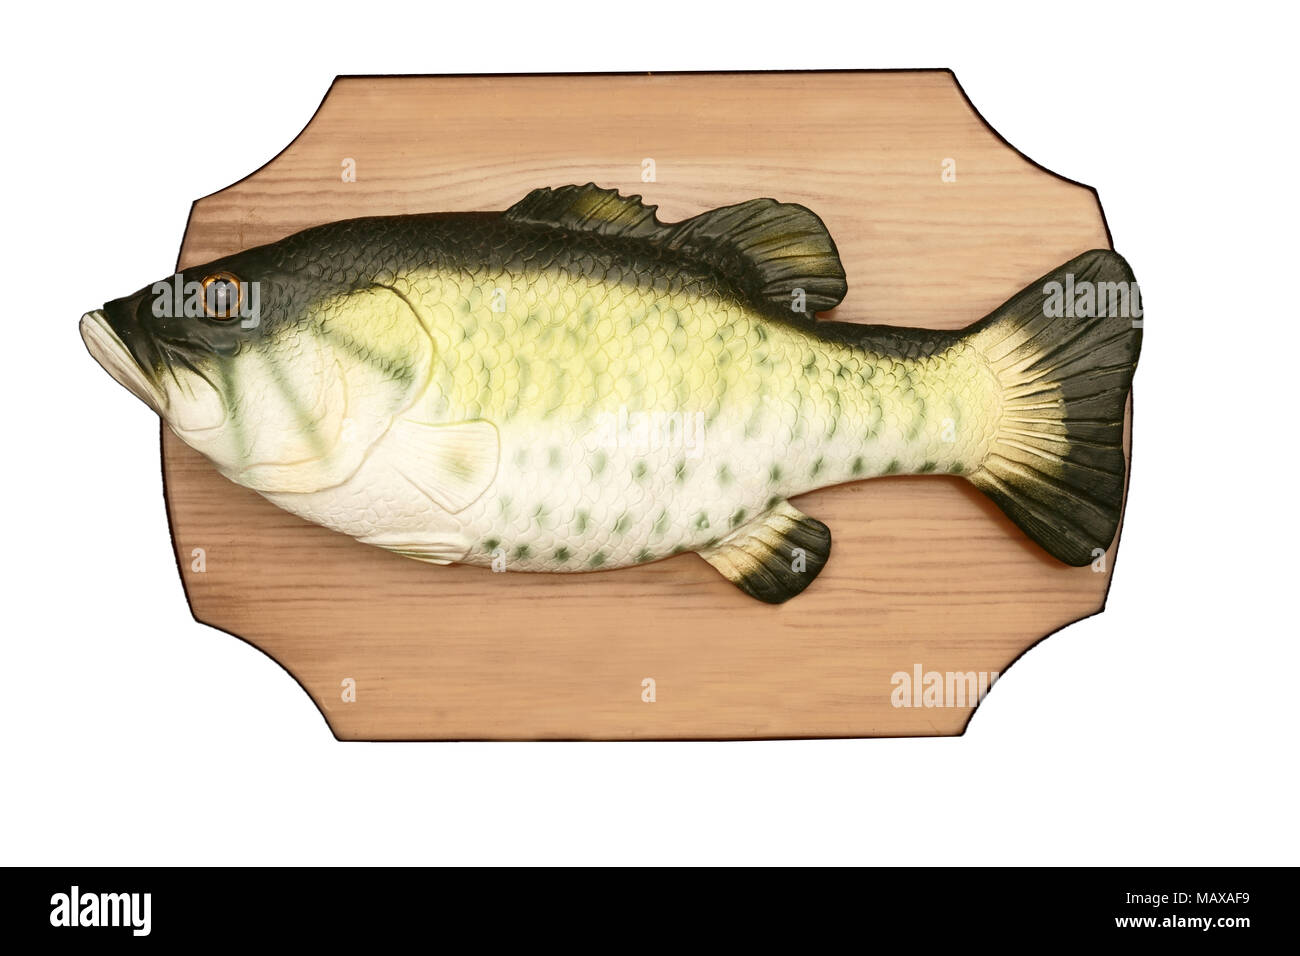 Fishing ceremony Cut Out Stock Images & Pictures - Alamy